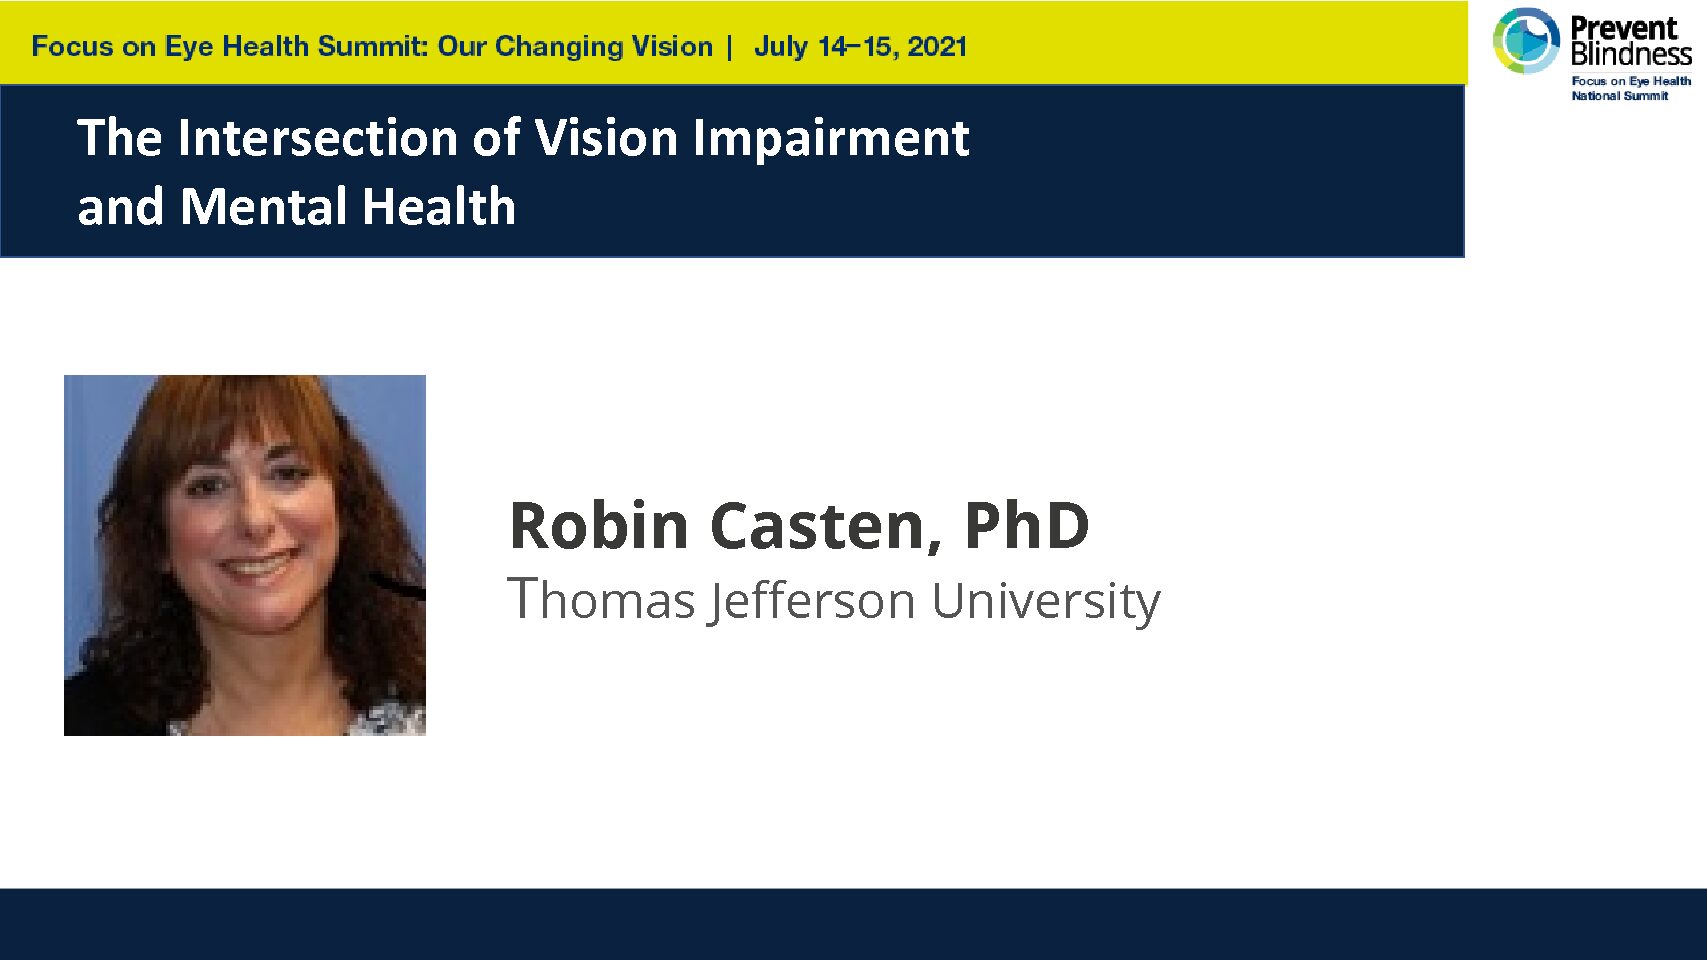 The Intersection of Vision Impairment and Mental Health